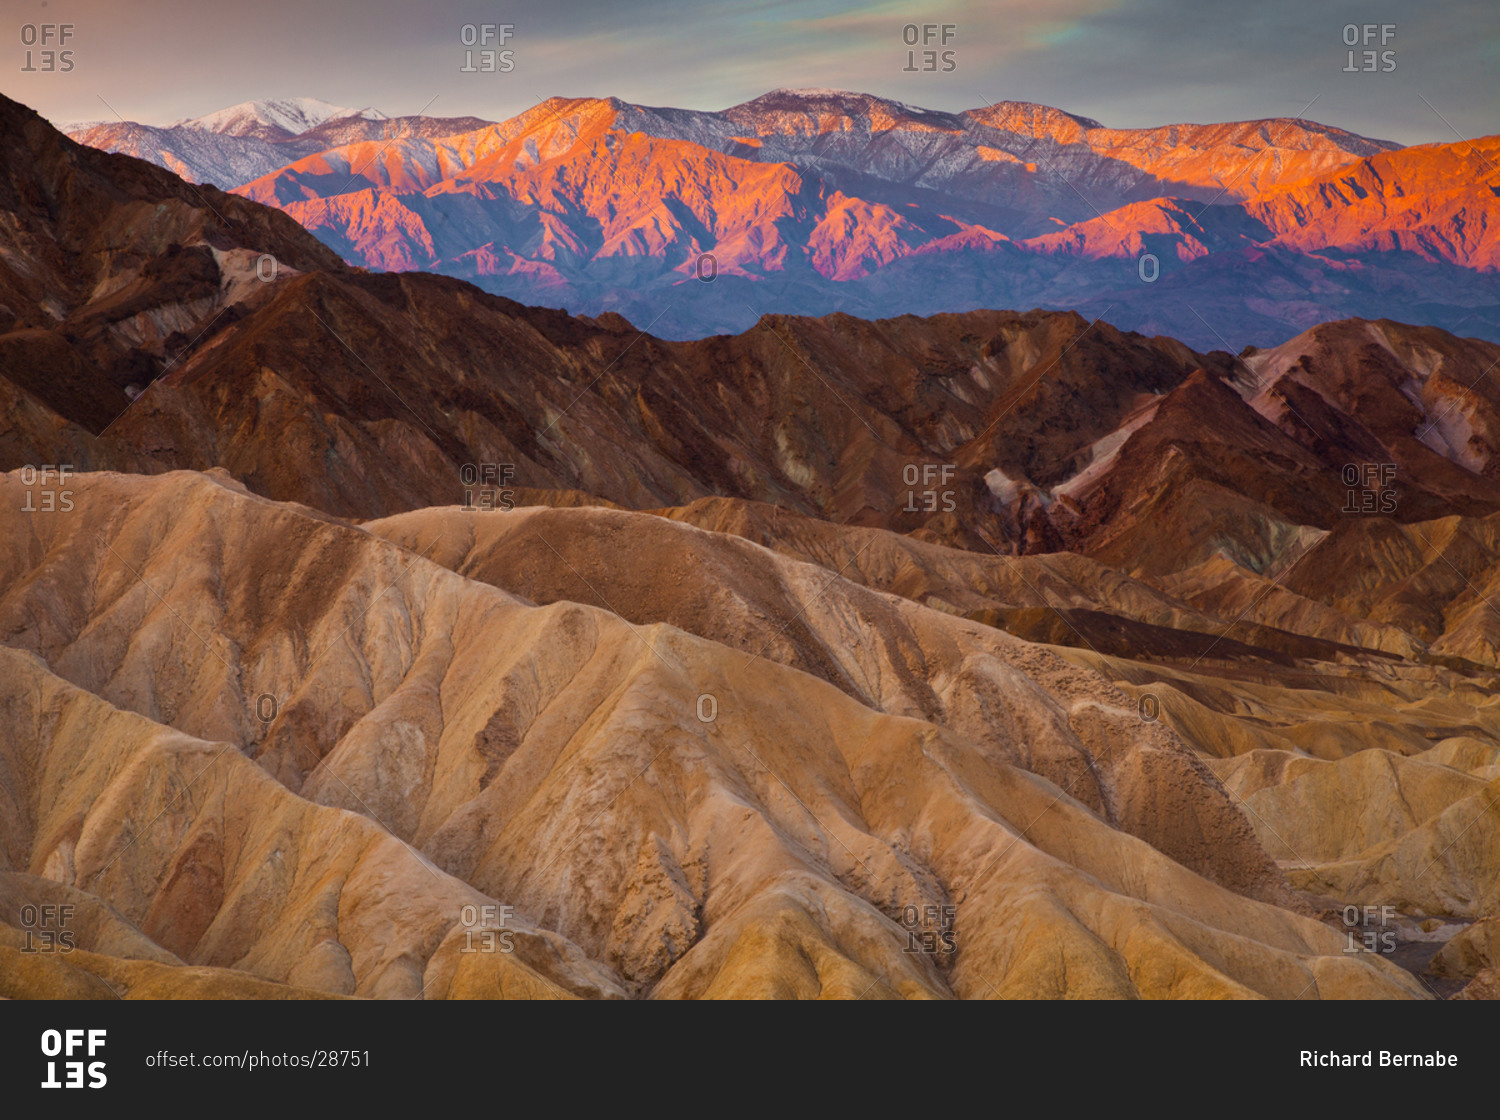 View from Zabriskie Point at sunrise looking over Death Valley and the Panamint Range, Death Valley National Park, California